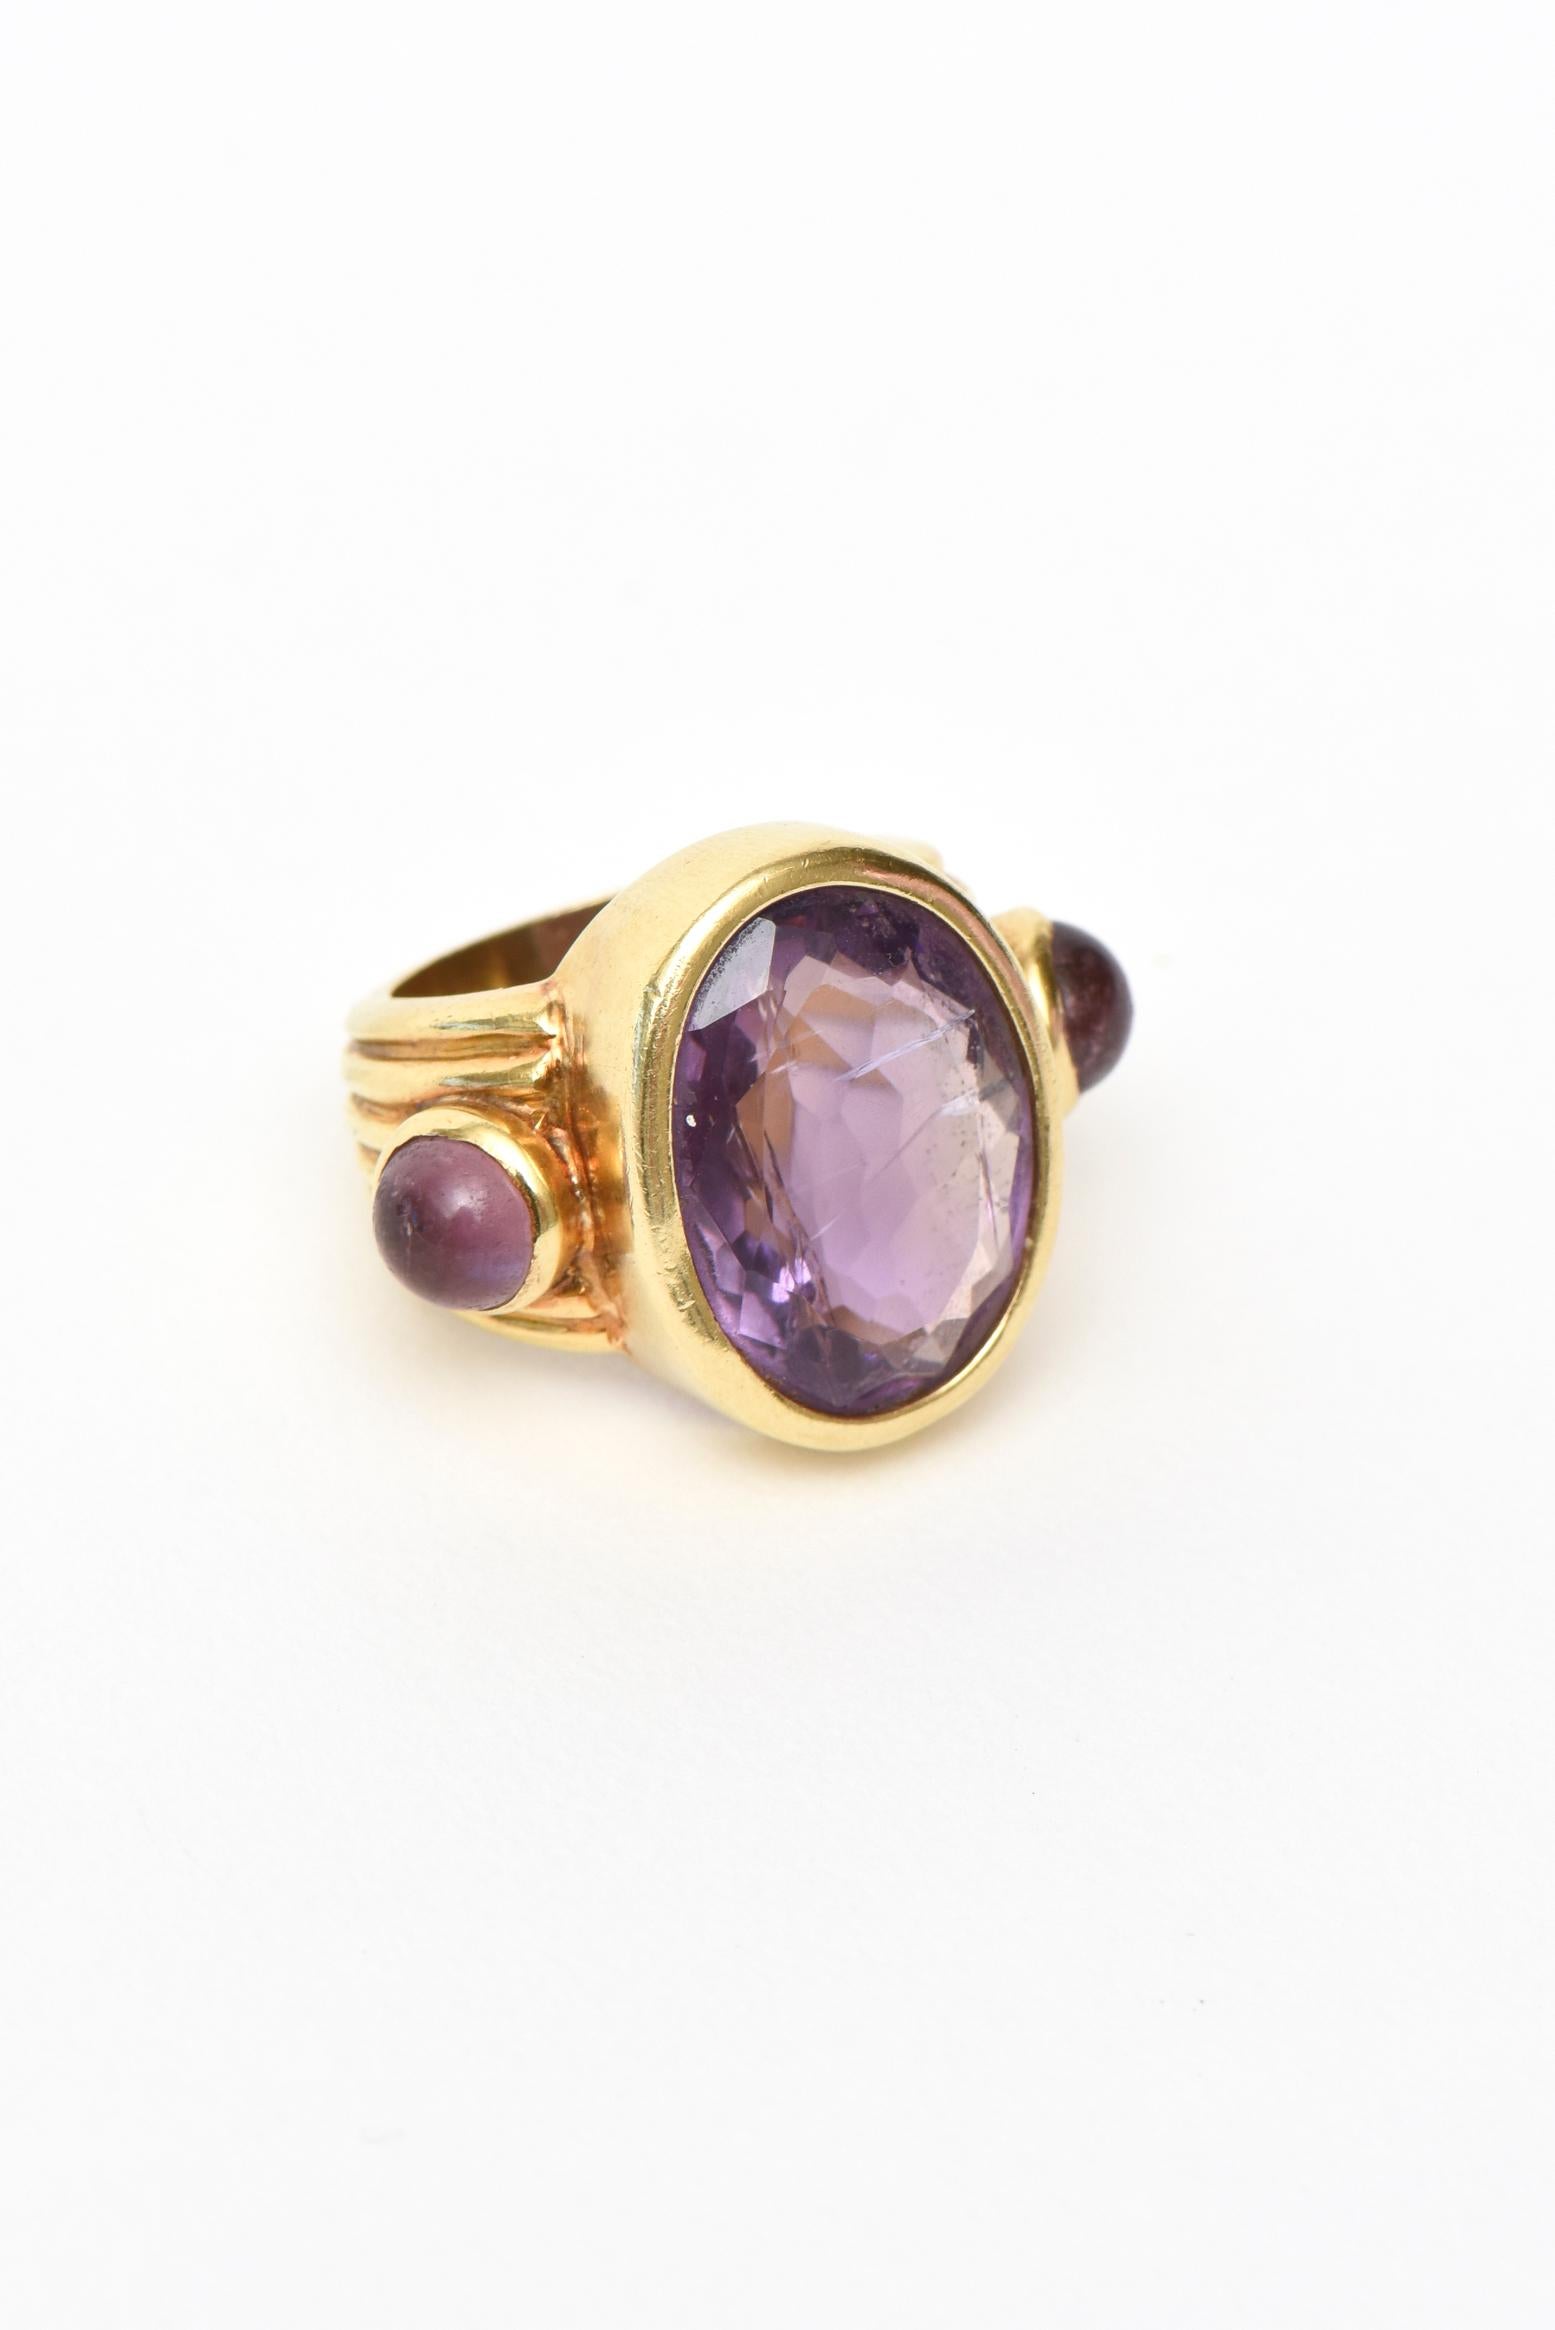 This well made and beautiful vintage Italian 18K Gold and amethyst ring has 2 cabochon amethyst stones on the side. It is unsigned and the ring size is 5.5. It has bands of lines of 18K gold on the sides and back. Finely made. The weight is approx.